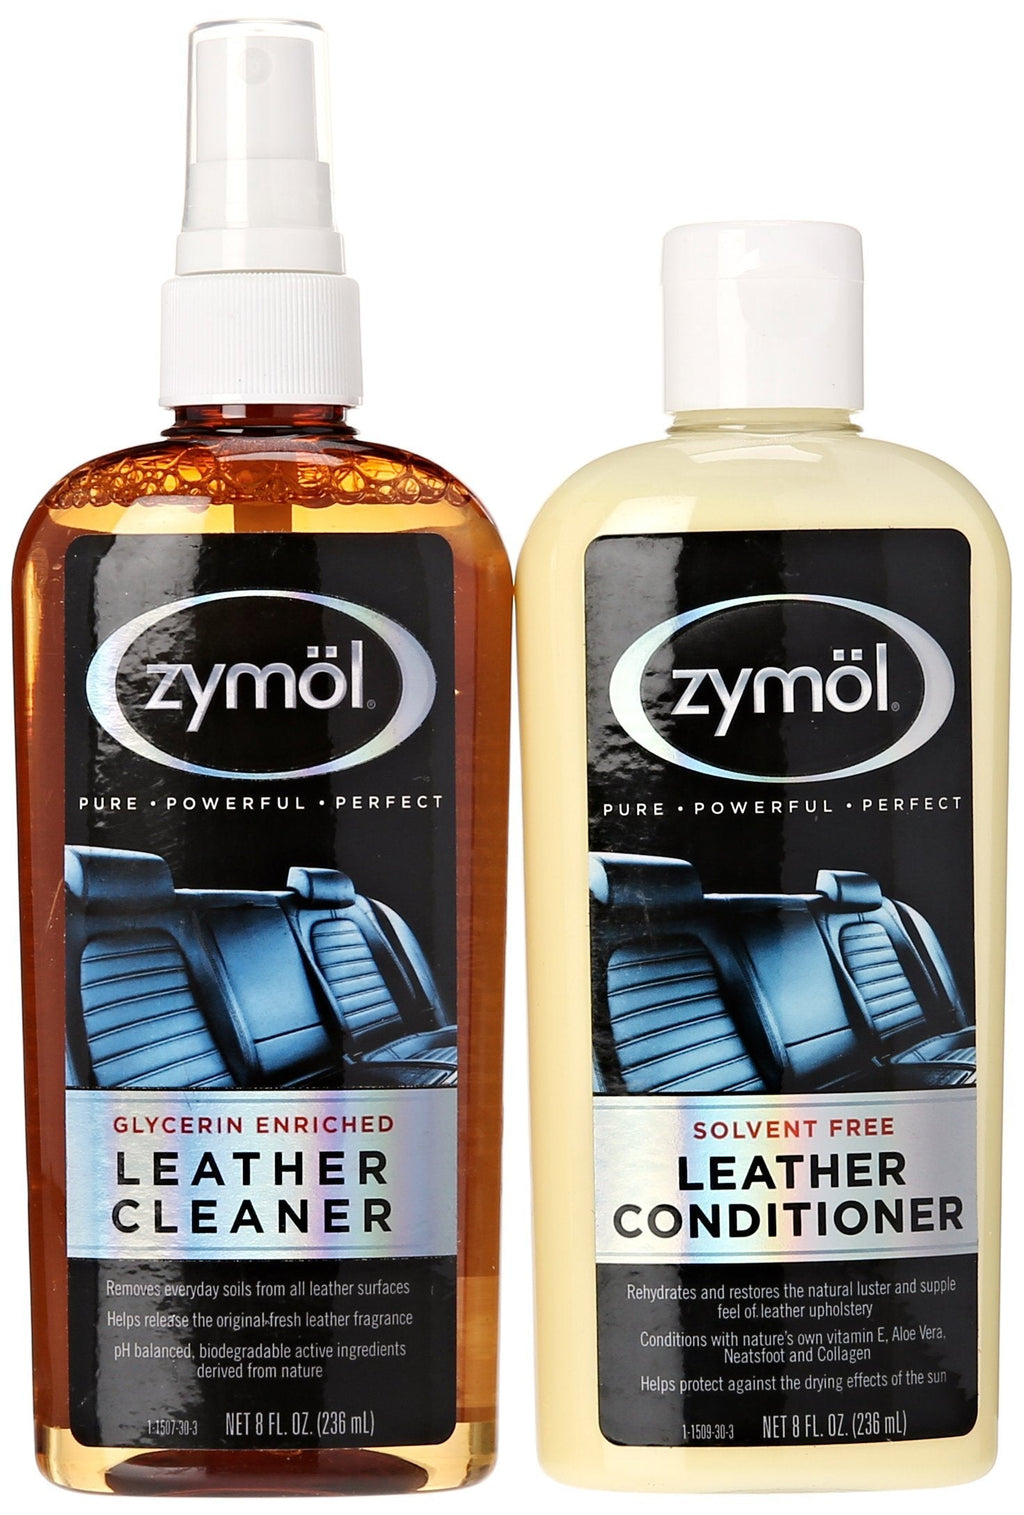  [AUSTRALIA] - Zymol Z-507 Leather Cleaner and Z-509 Leather Conditioner (8 Ounce Each)